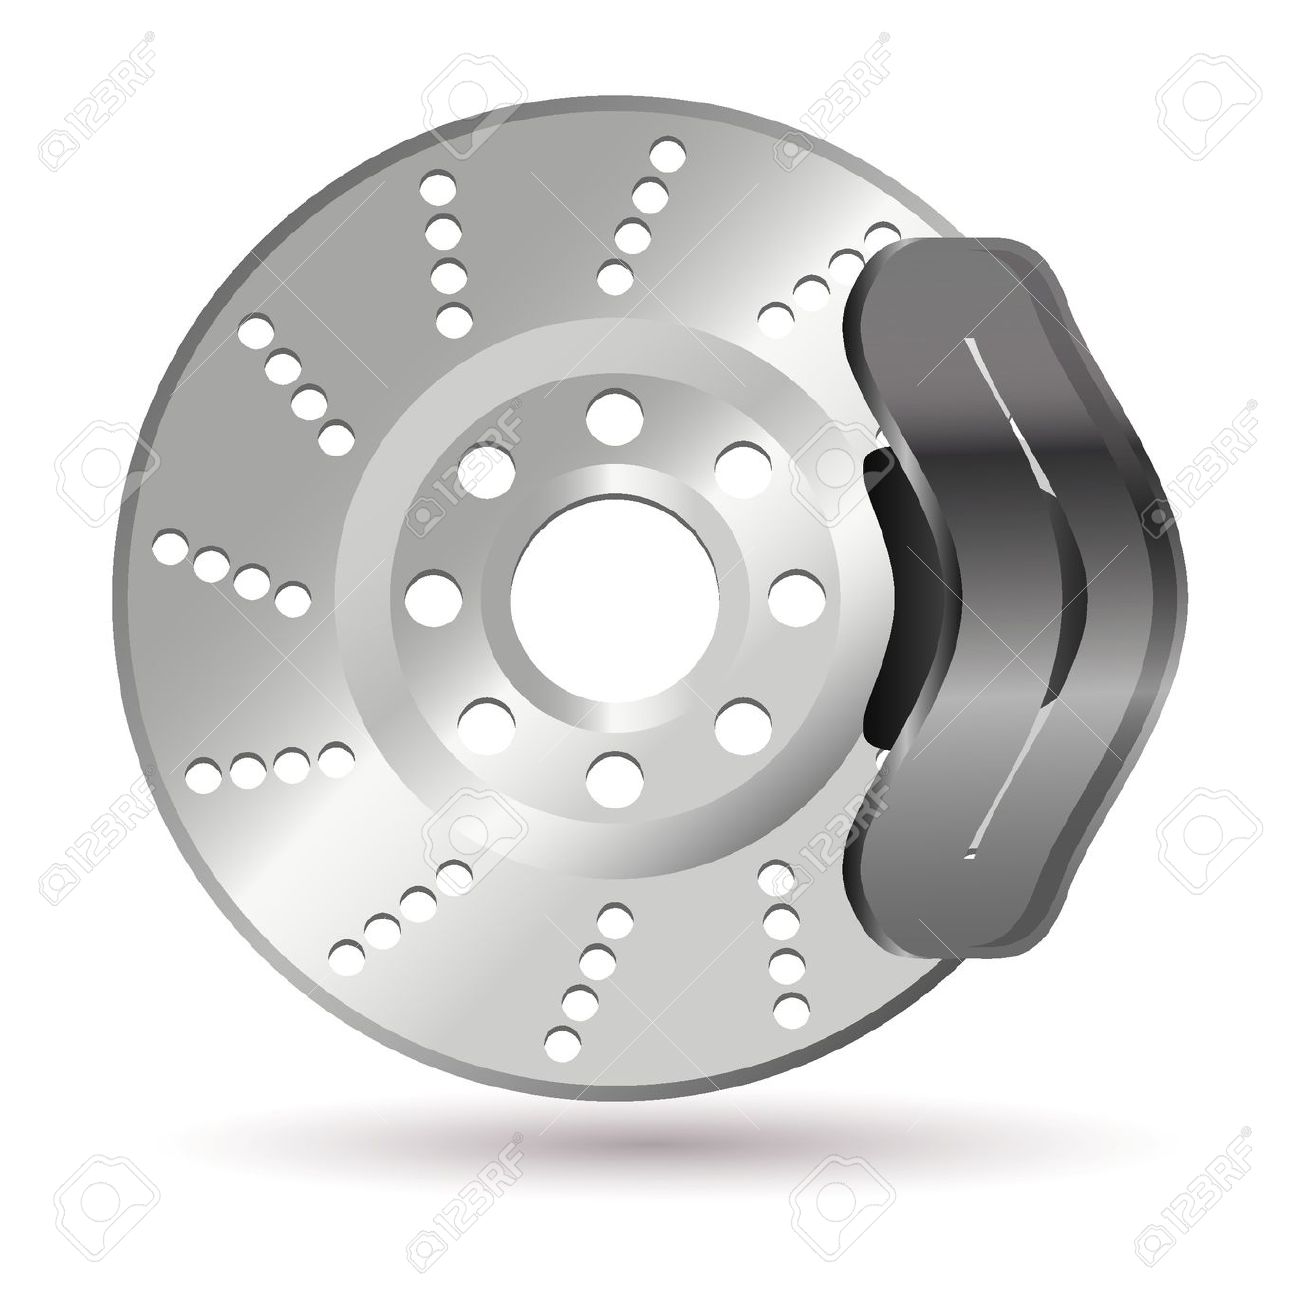 clipart of car brakes - photo #20